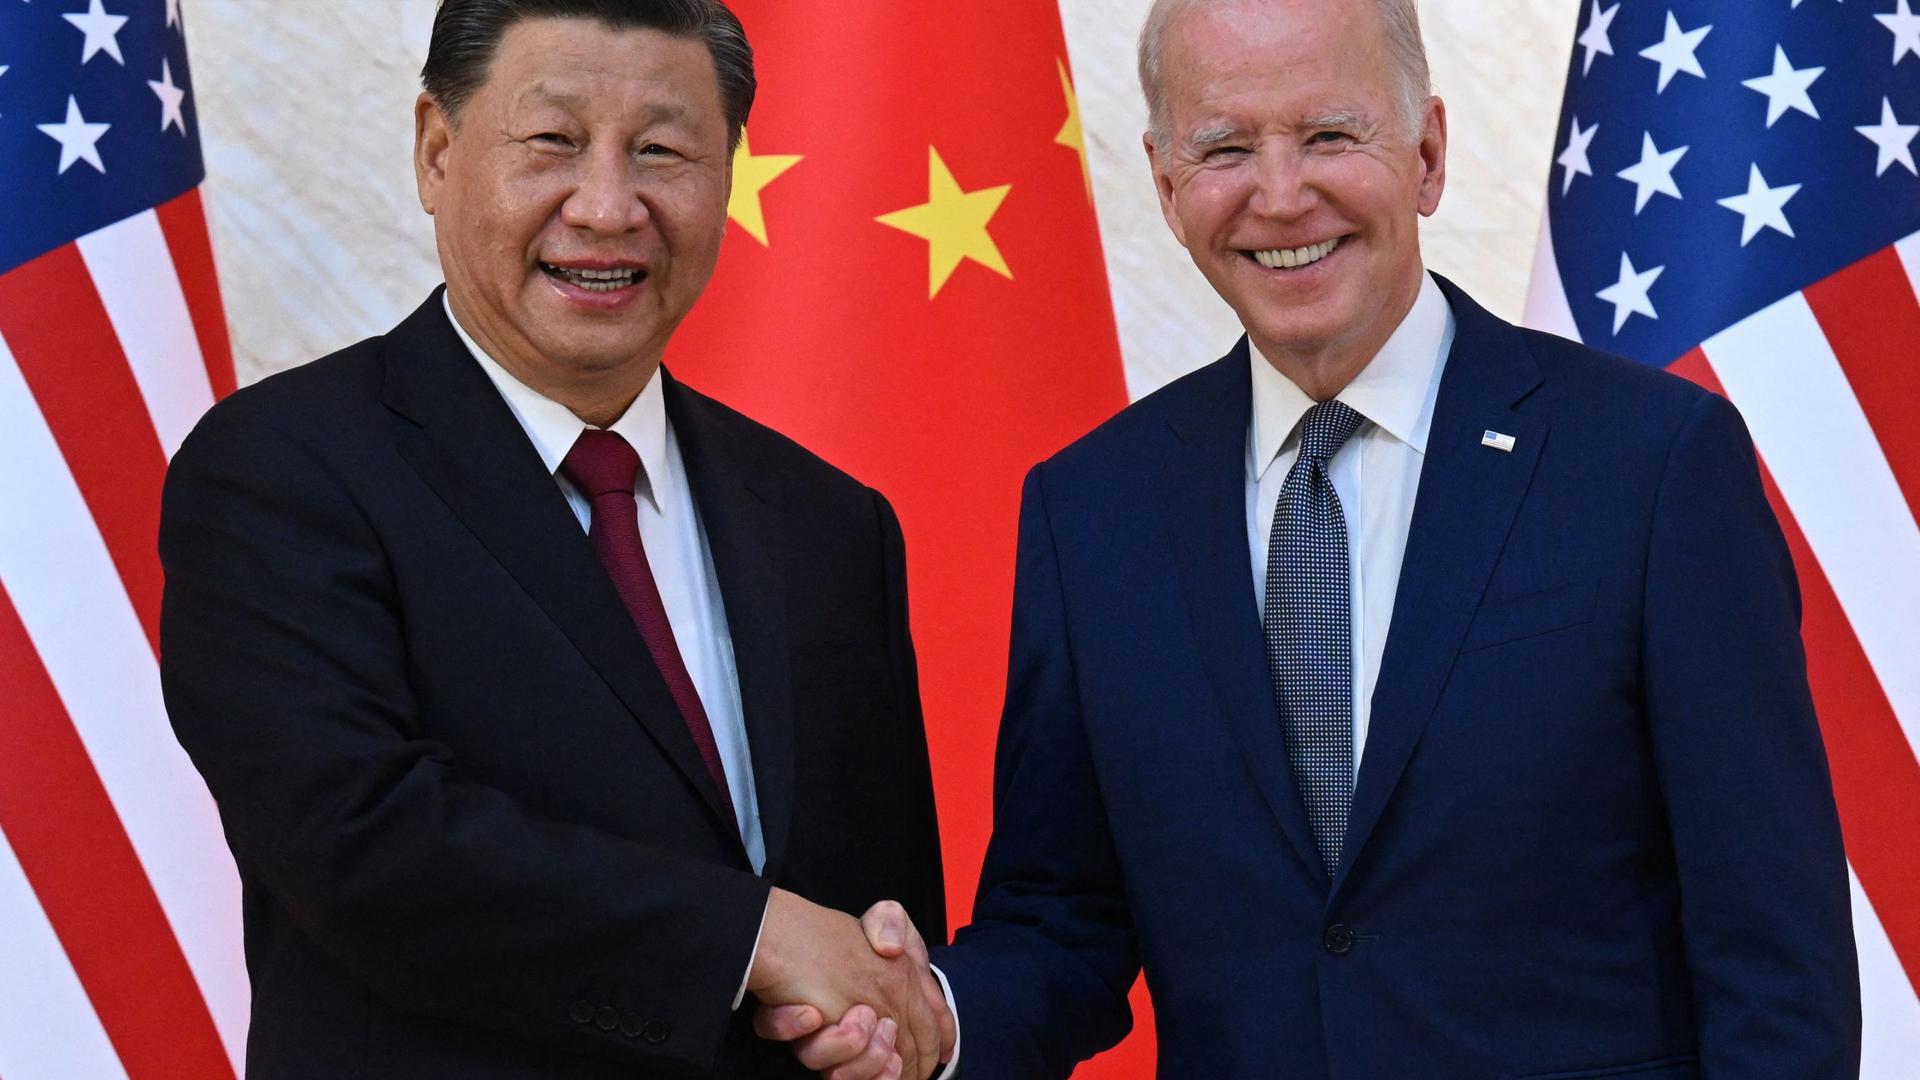 US President Joe Biden and China's President Xi Jinping shake hands as they meet on the sidelines of the G20 Summit in Bali on Monday